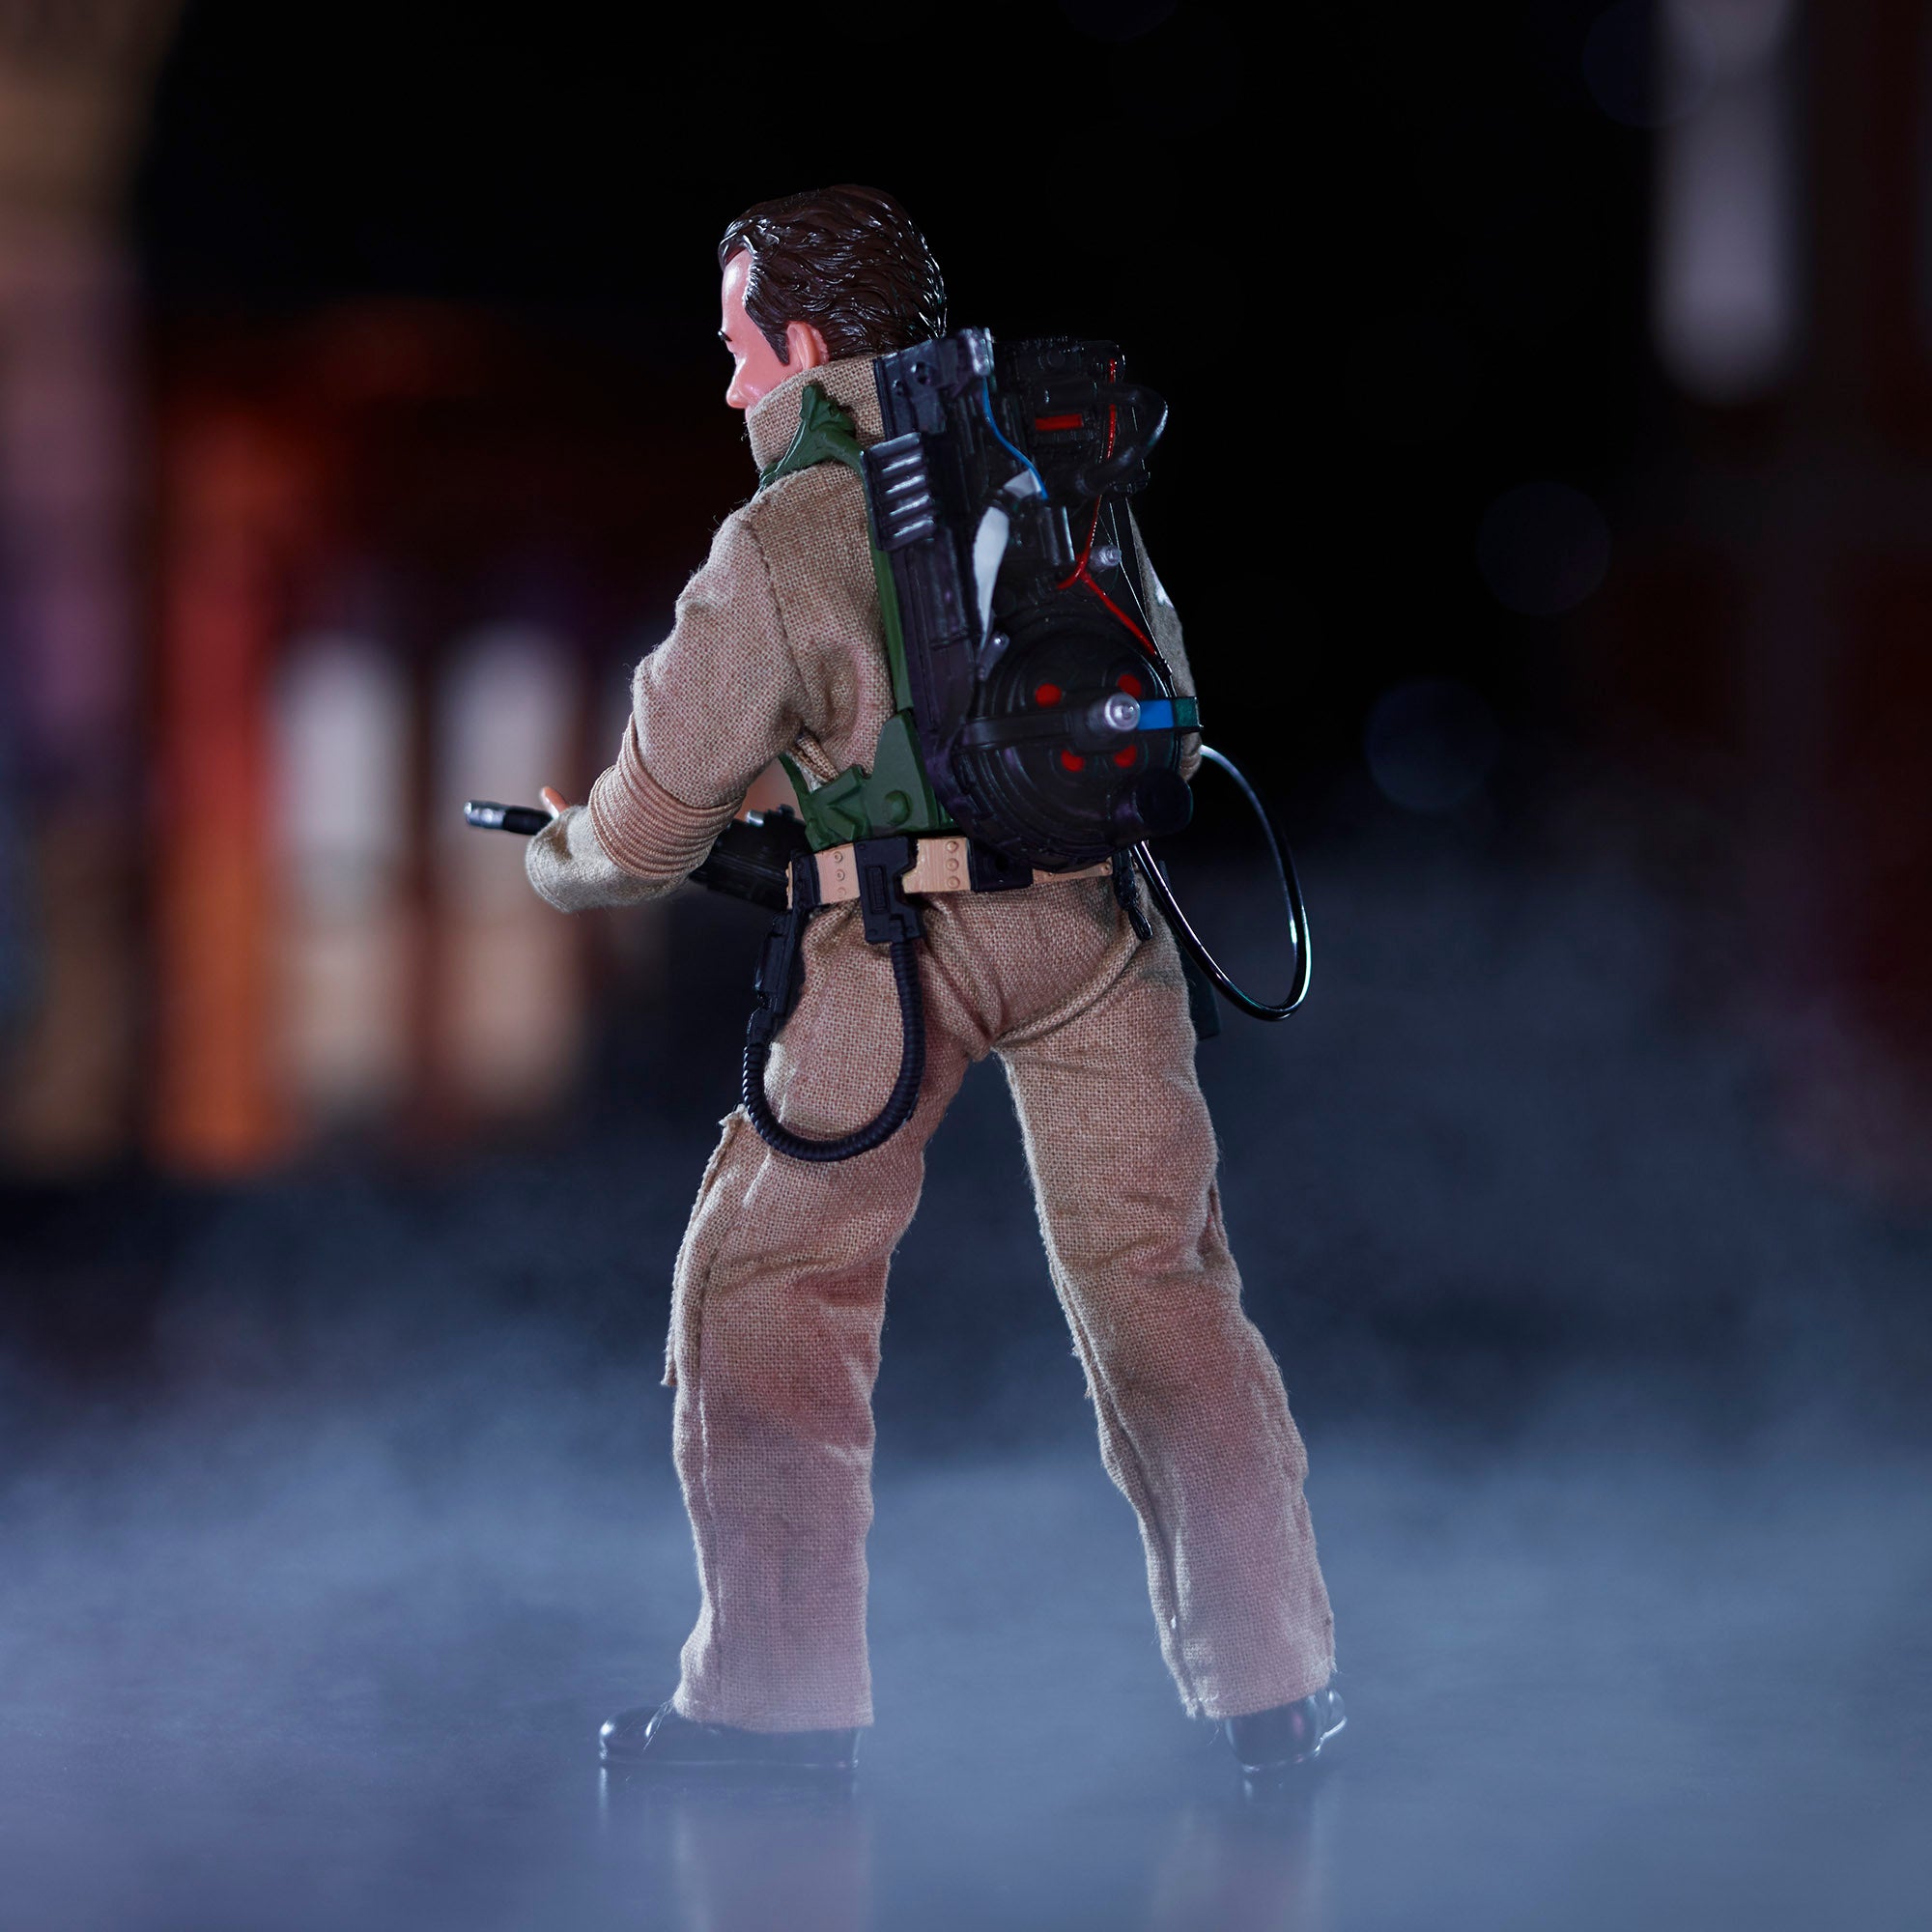 Ghostbusters x Mego 23